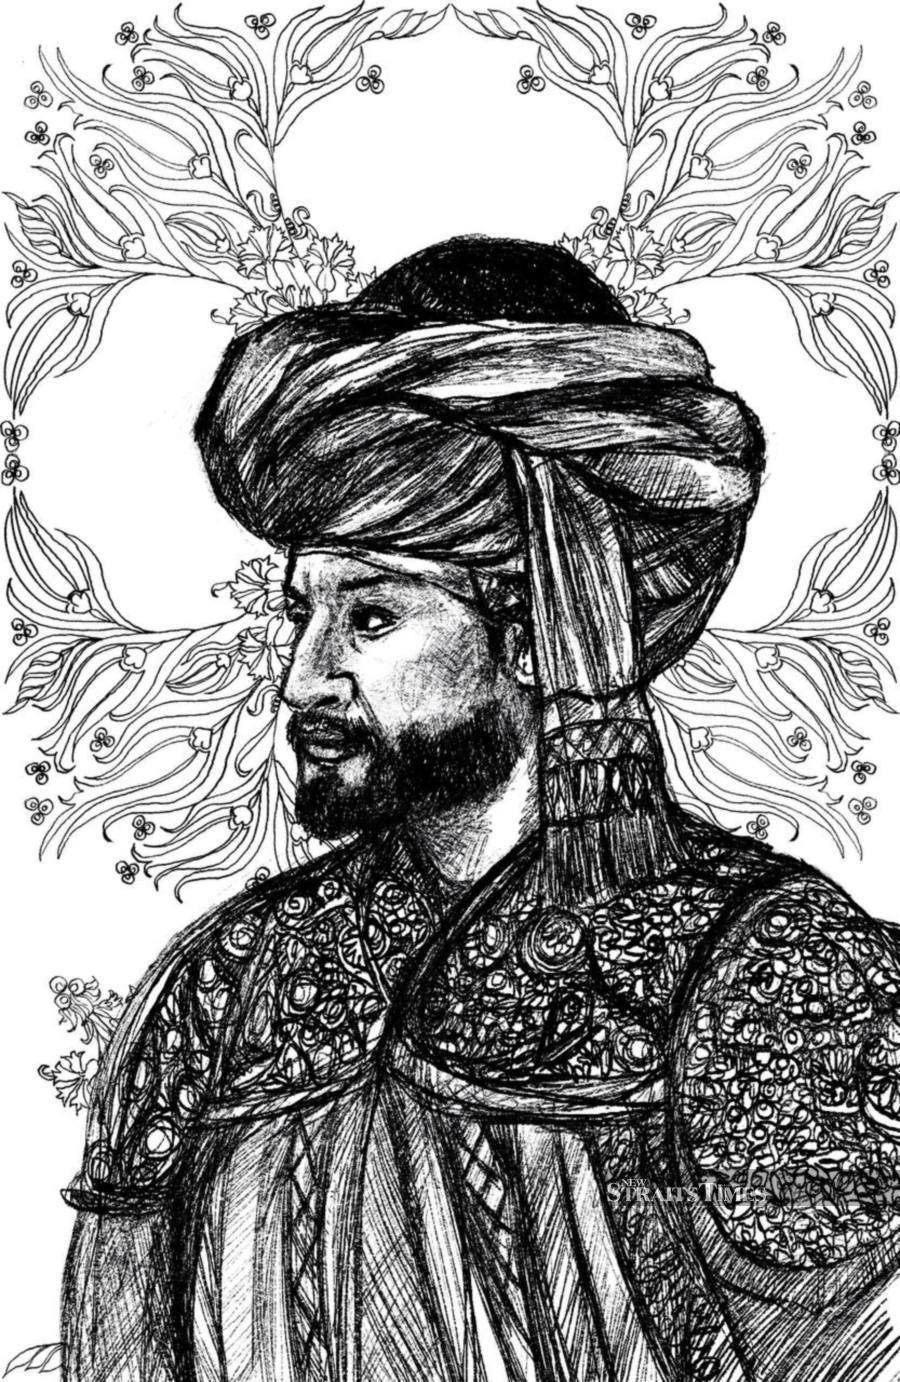  Sultan Mehmed, also known as Al-Fateh the Conqueror, conquered Constantinople in 1453. Illustrated by Ariyana Ahmad.